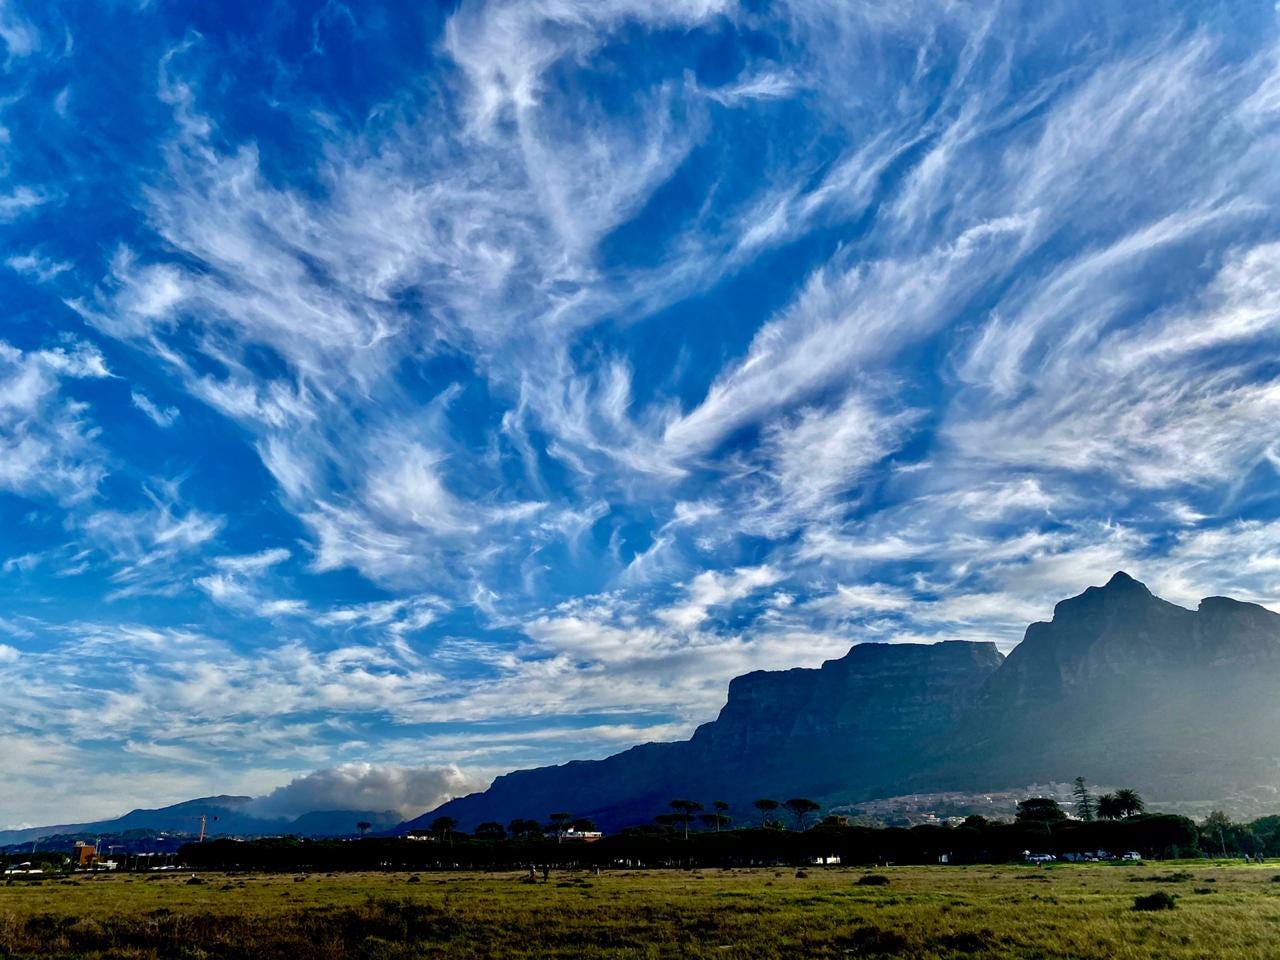 a landscape view of a mountain with whispy white clouds against a cornflower blue sky